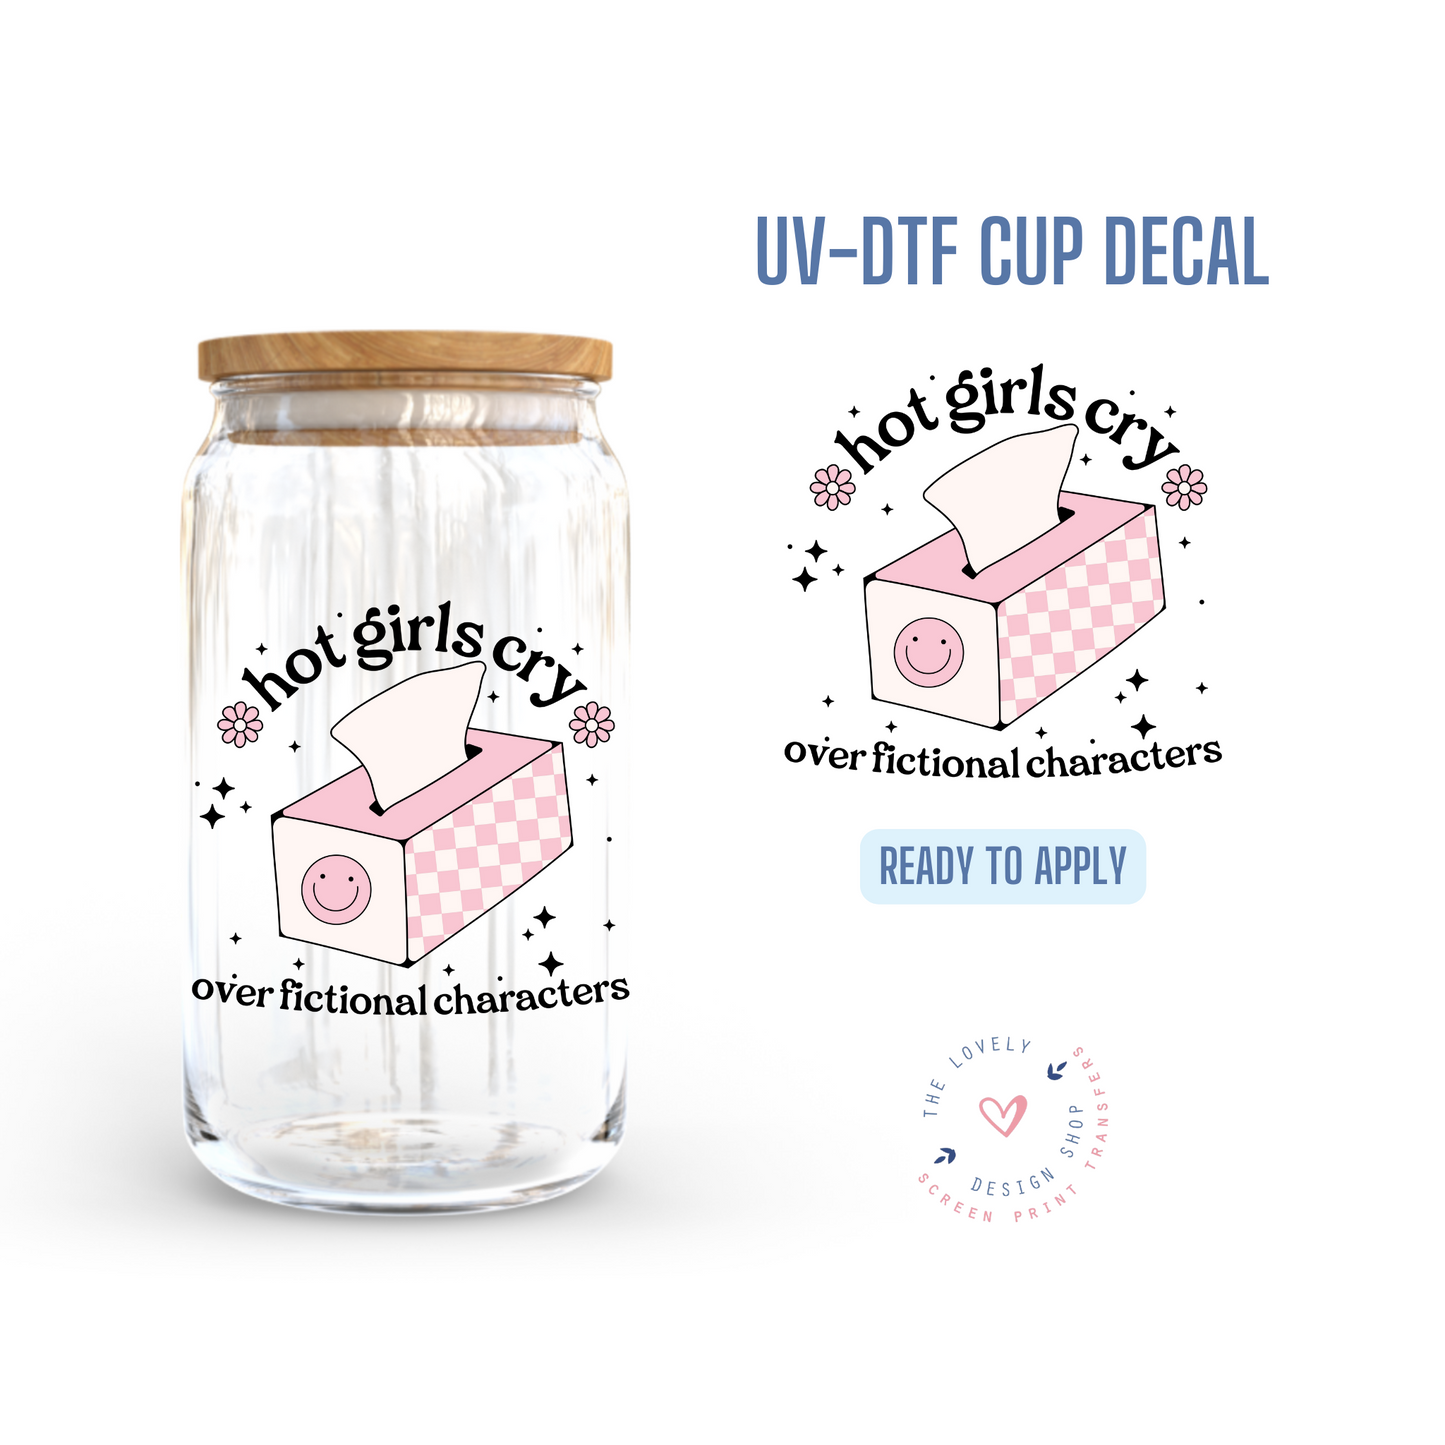 Hot Girls Cry Over Fictional Characters - UV DTF Cup Decal (Ready to Ship) Mar 26